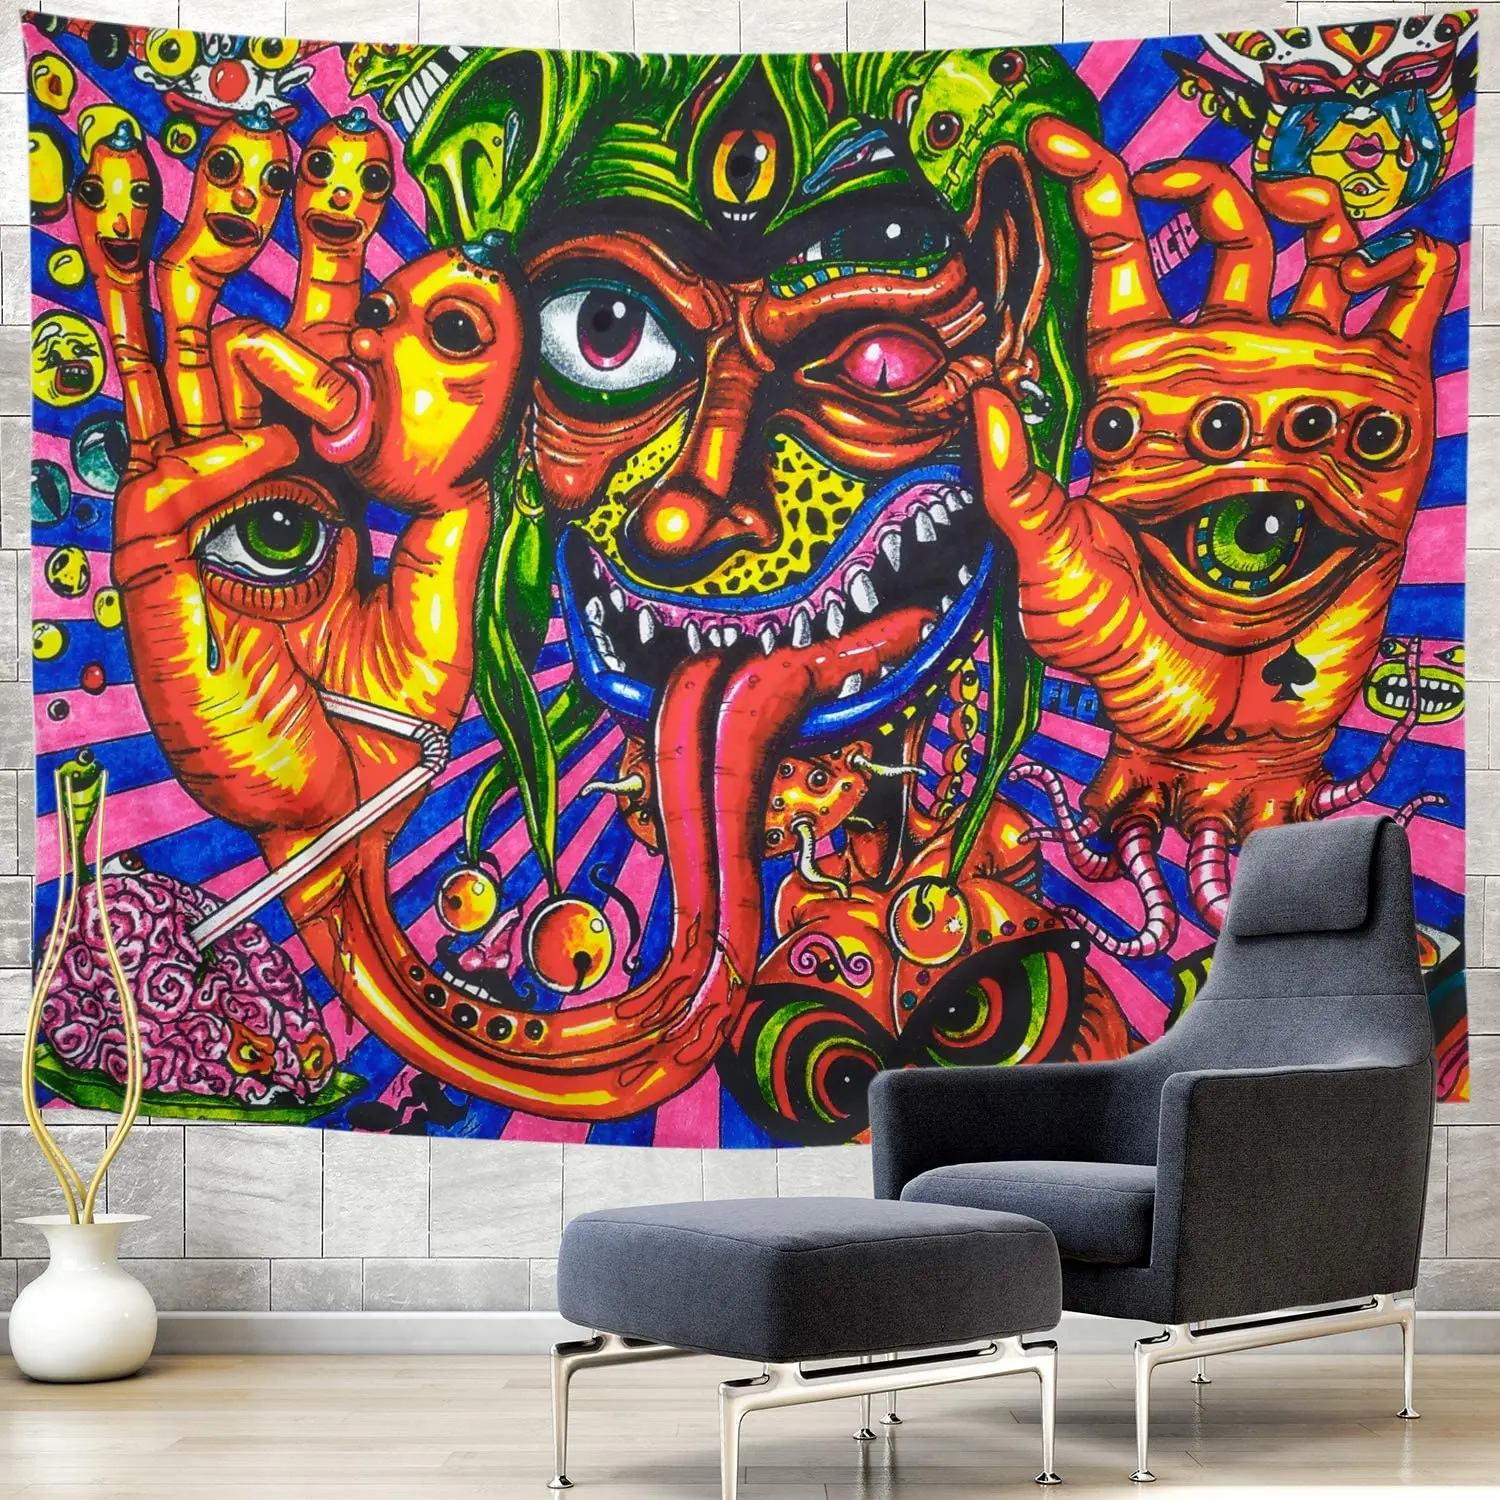 Hippie Tapestry Trippy Scenery Art Room Wall Hanging Trippy Tapestries Home Deco 